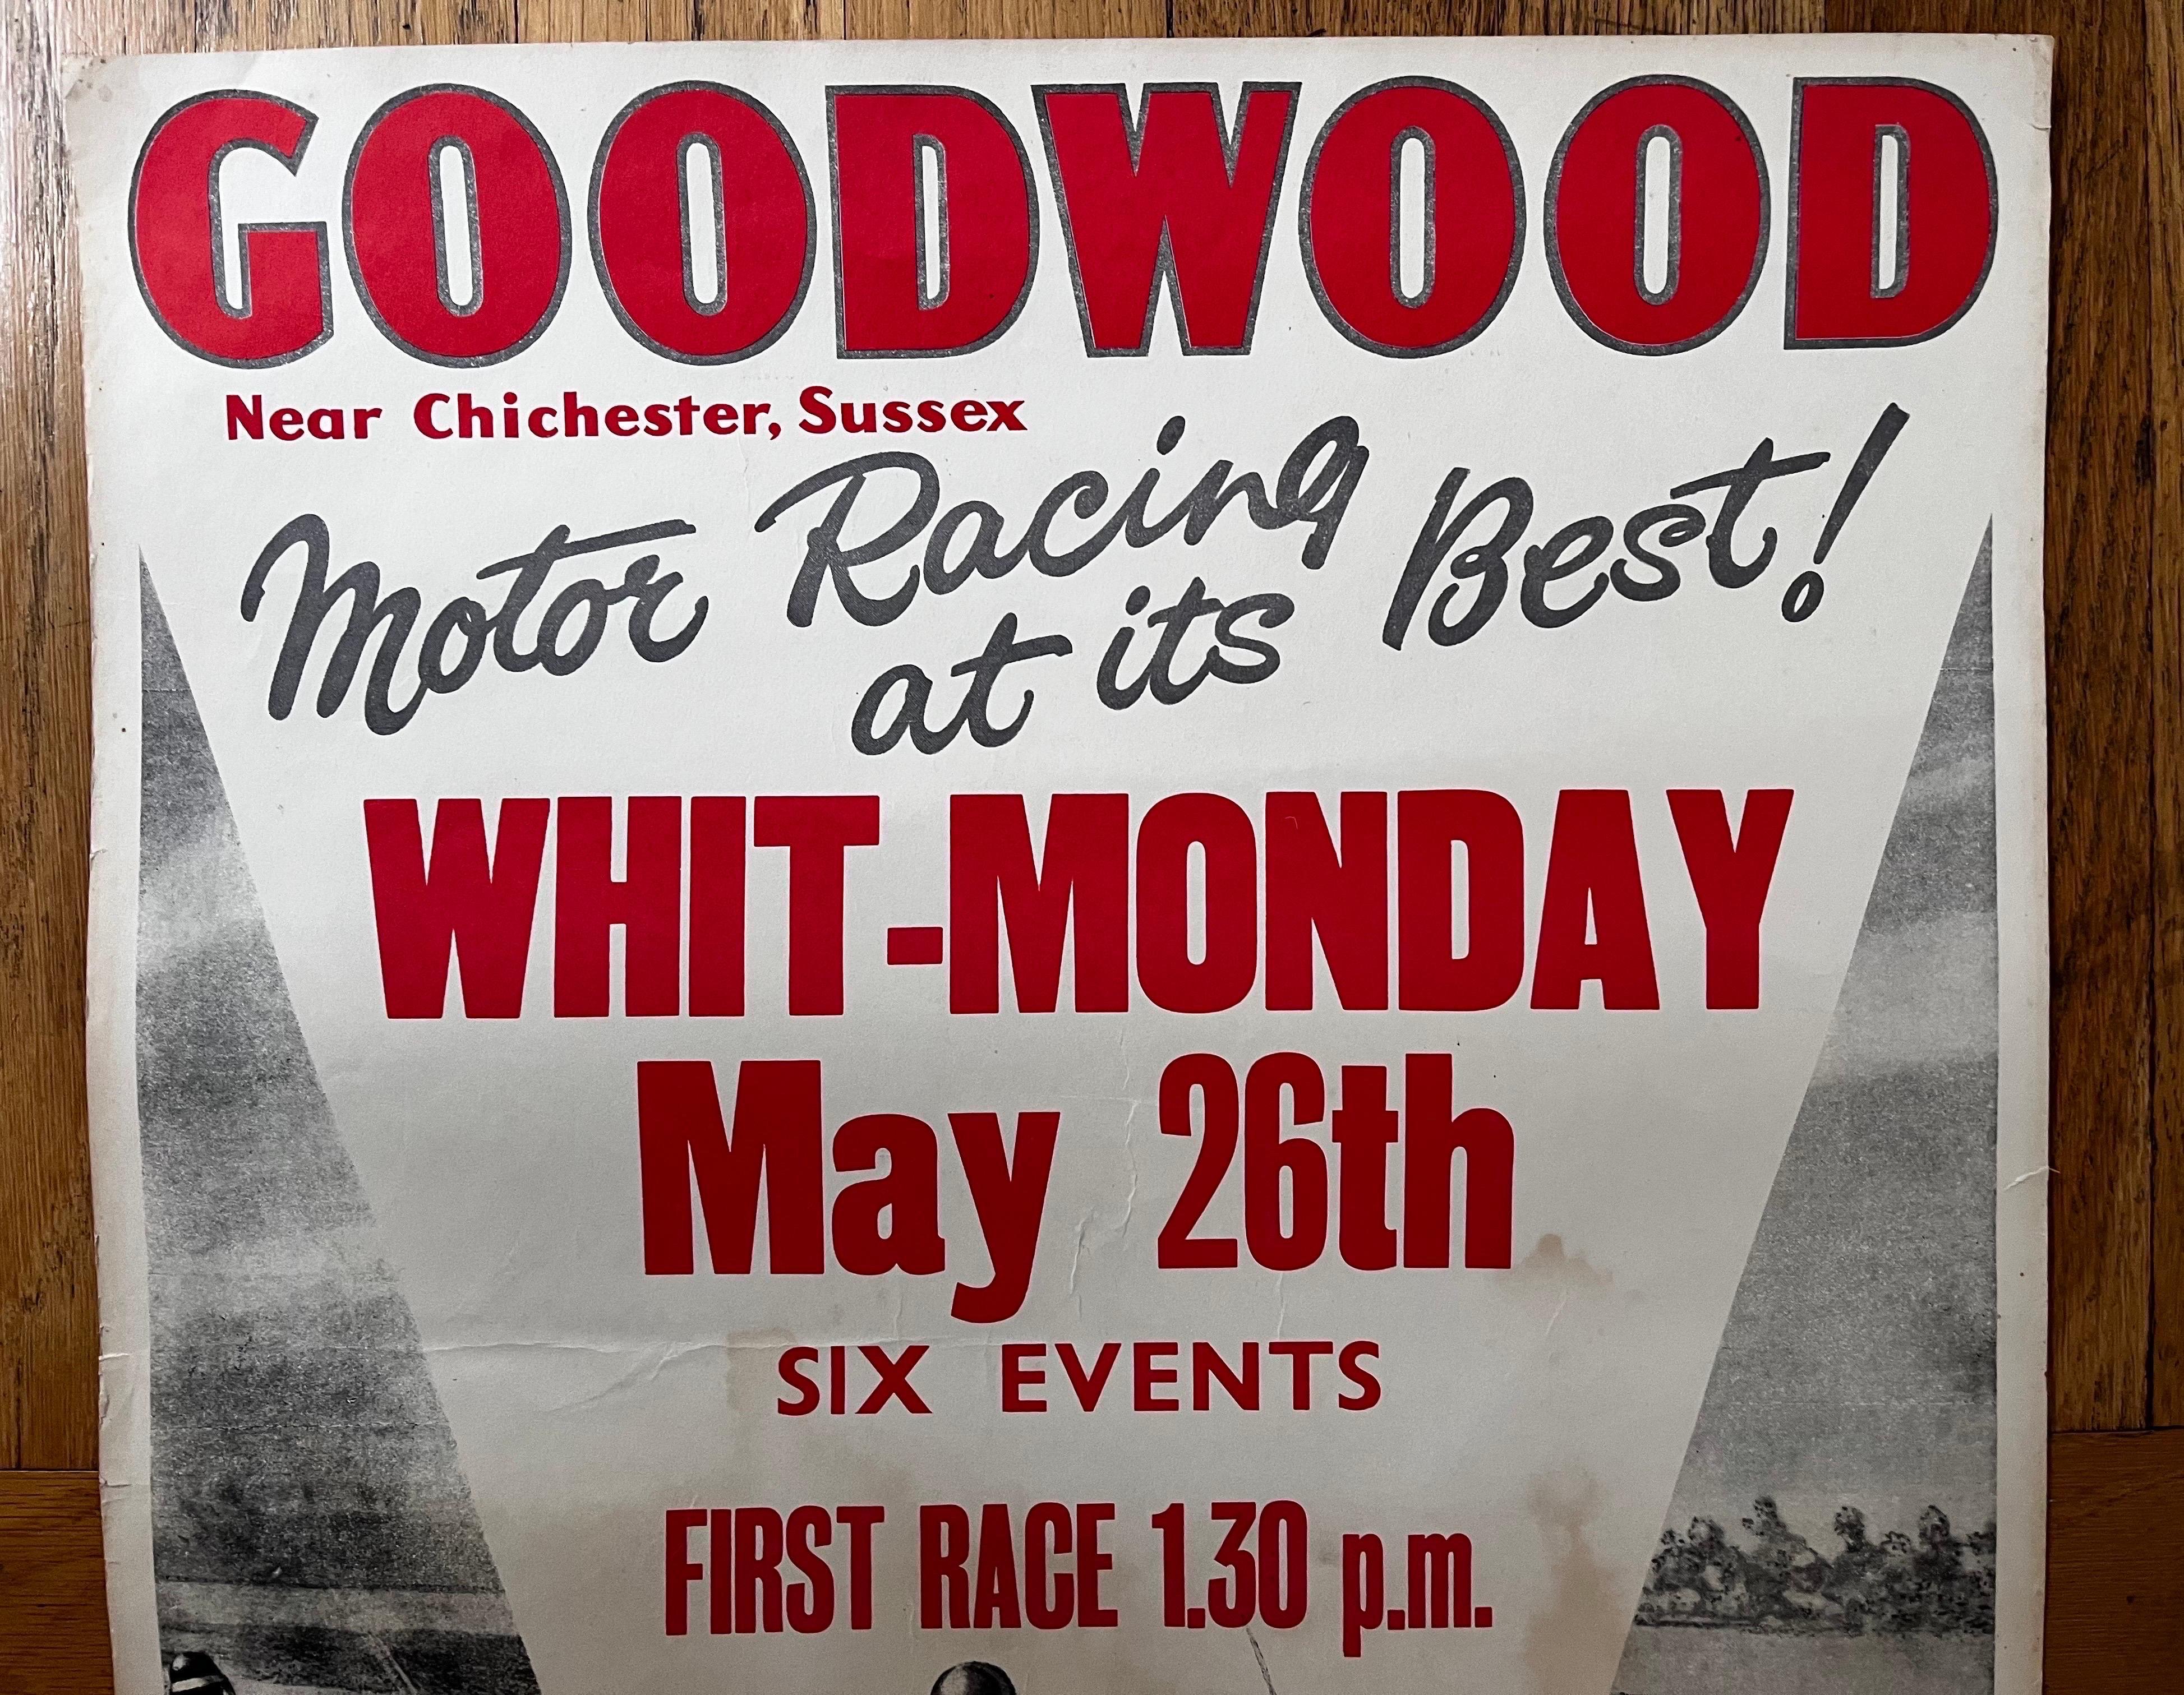 English Vintage Racing Poster
Goodwood Whit-Monday Motor Racing, c. 1958

some discoloration, wrinkles and folds, and a rip at bottom edge, etc.

